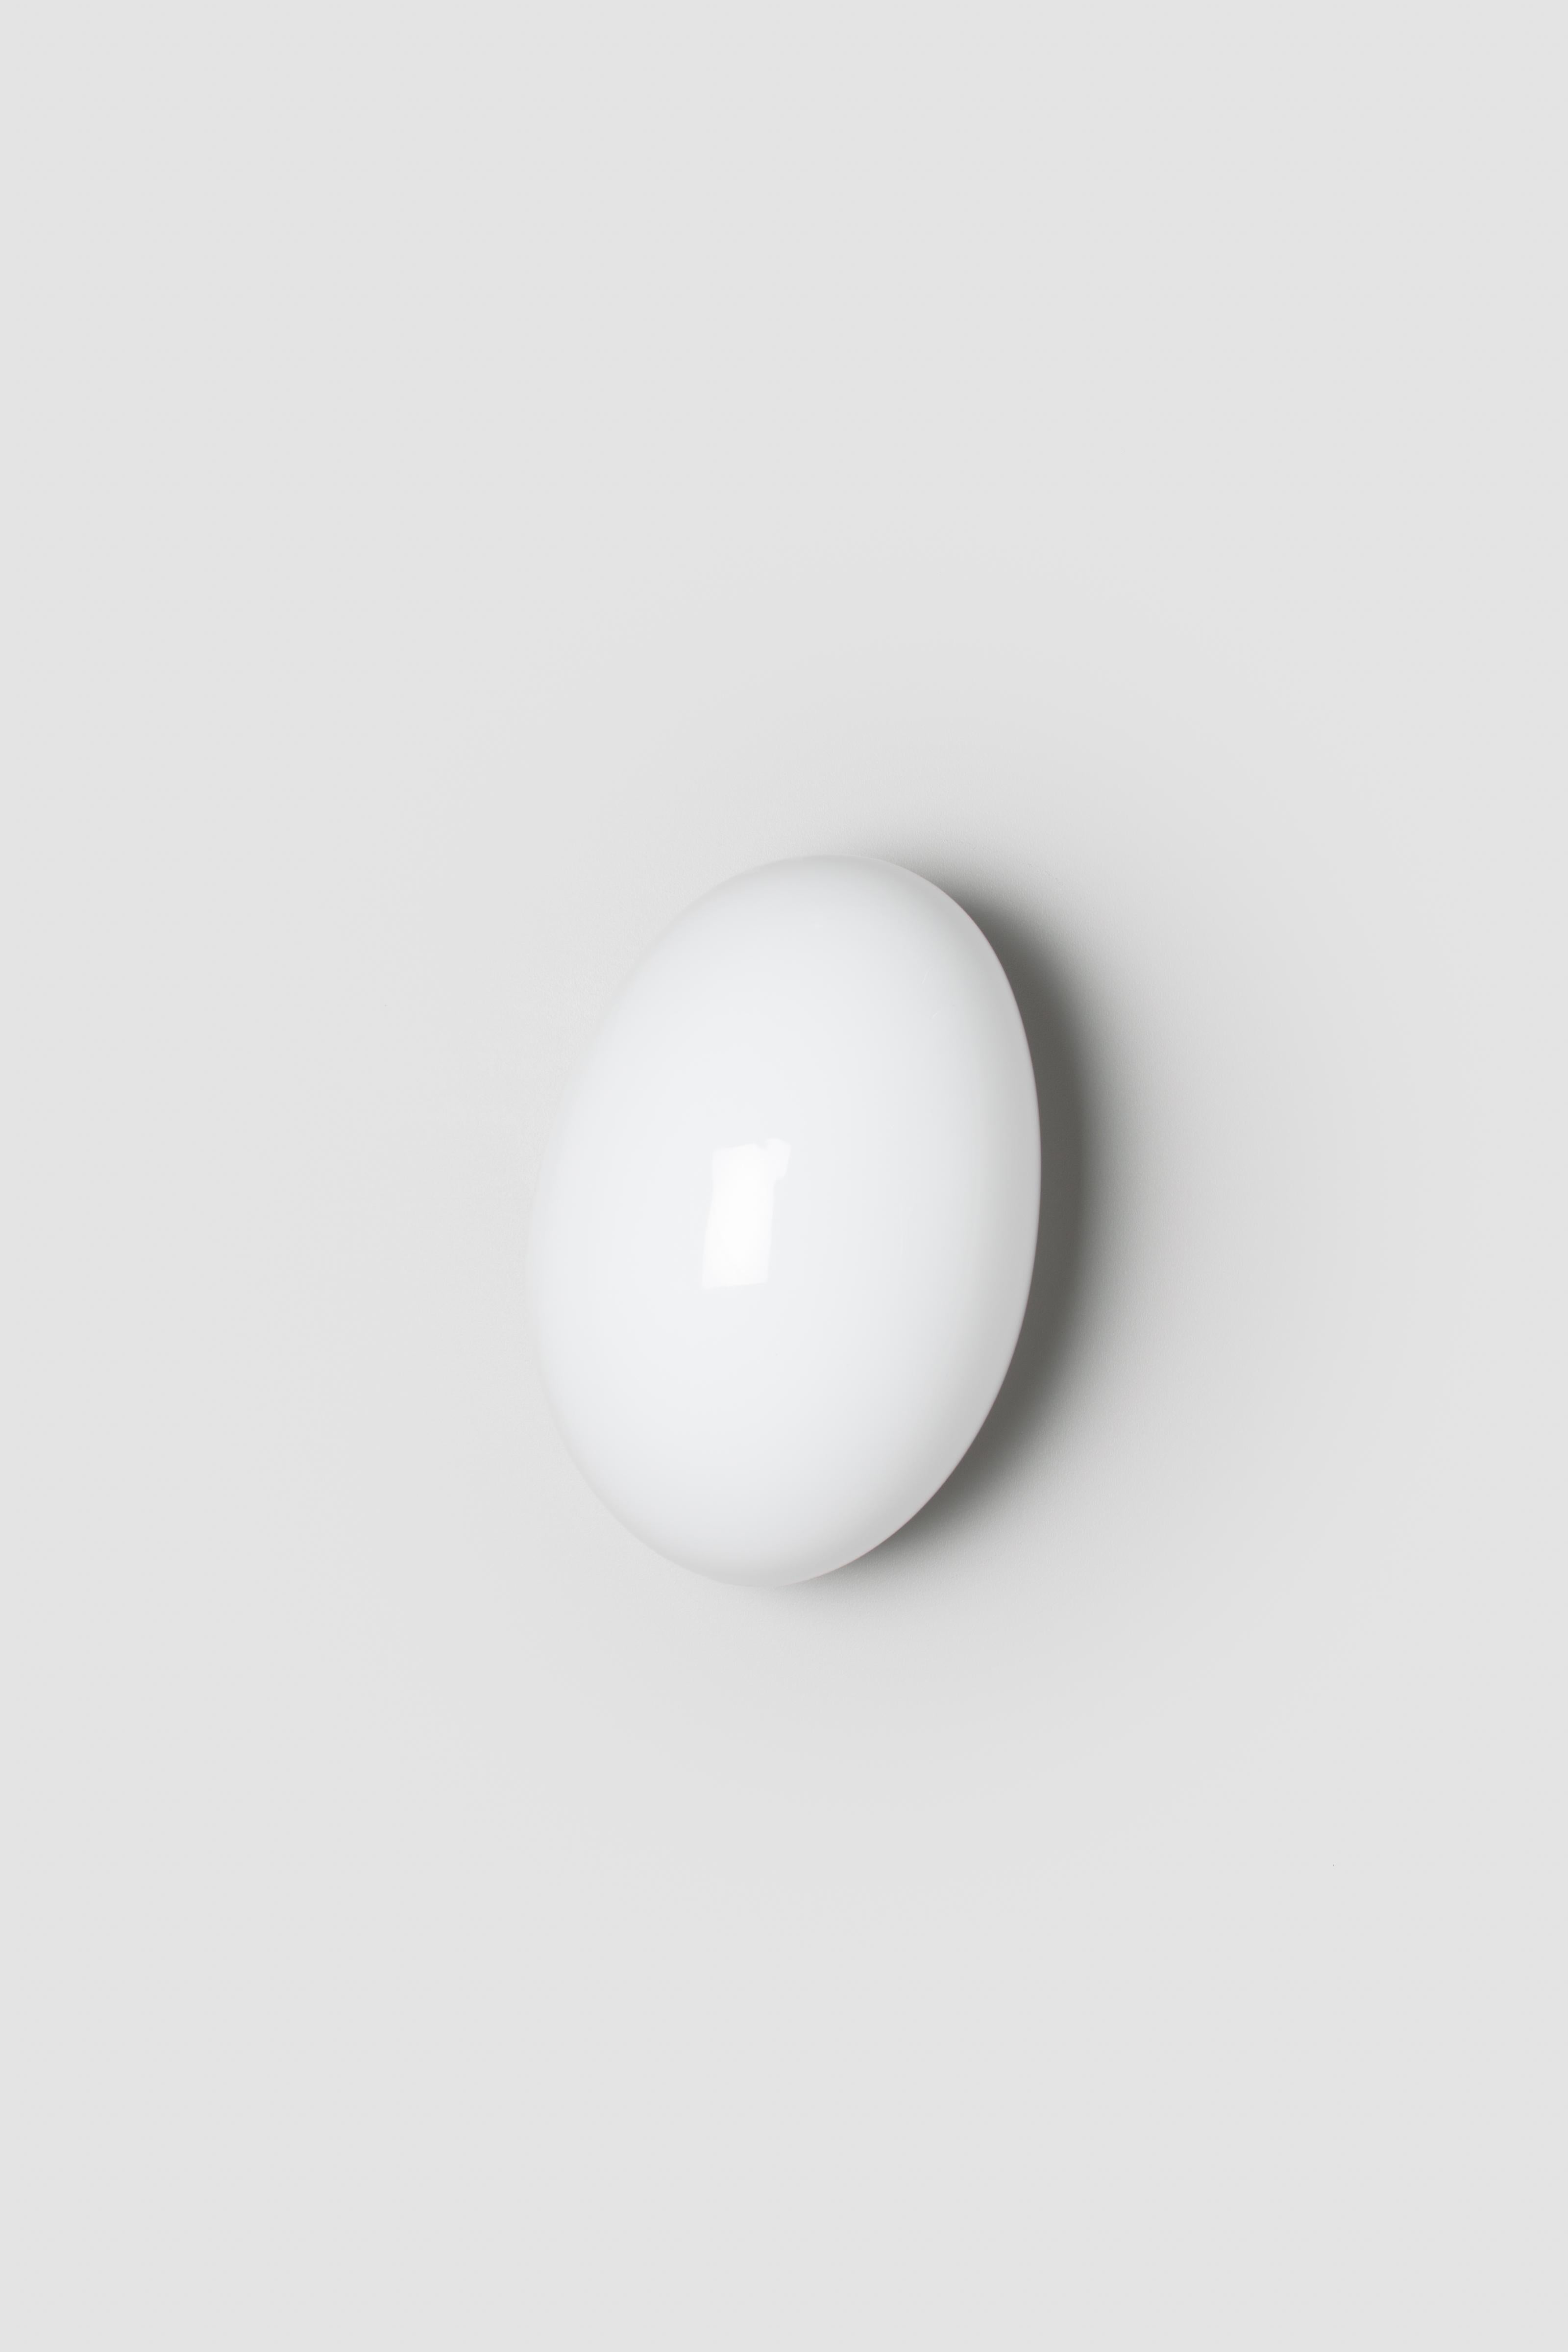 Contemporary Wall Lamp 'Pebble' by Andlight, Shape A, White In New Condition For Sale In Paris, FR